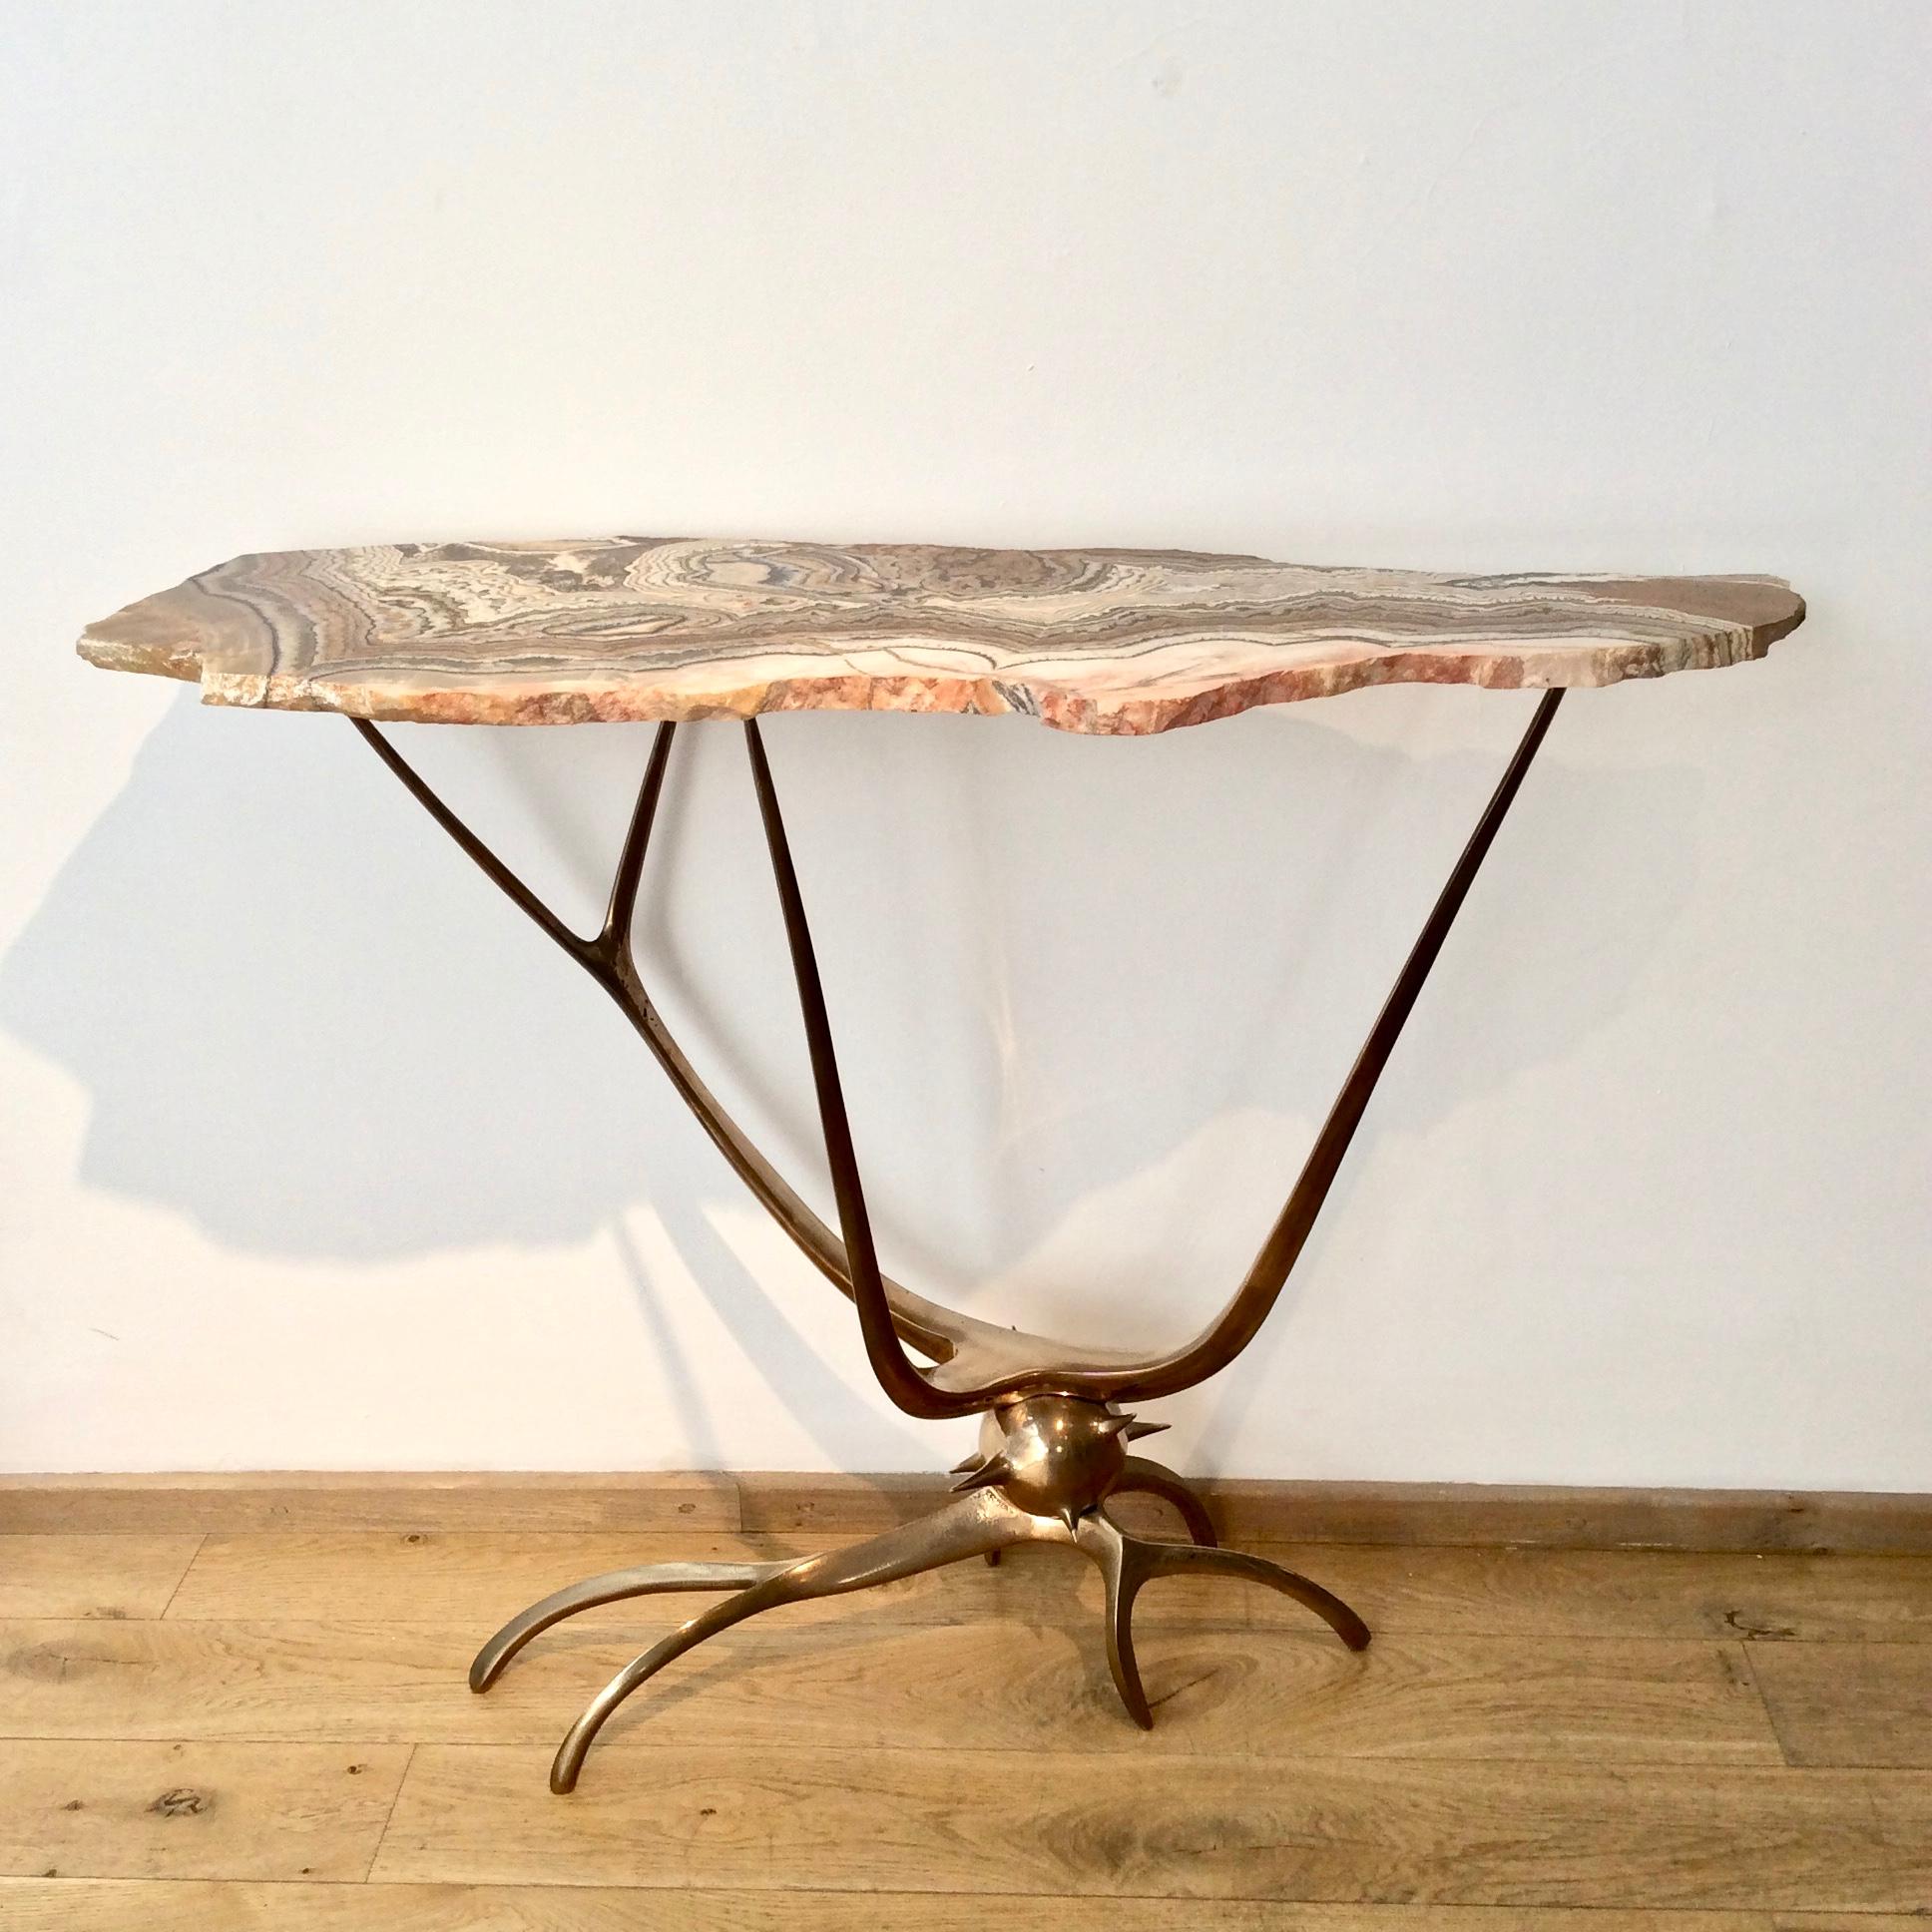 Spectacular sculptural bronze and hardstone console, the organic bronze base supports a naturally-shaped stone top with stunning veining.
Signed and dated 'Mark Brazier-Jones 2016' on base.